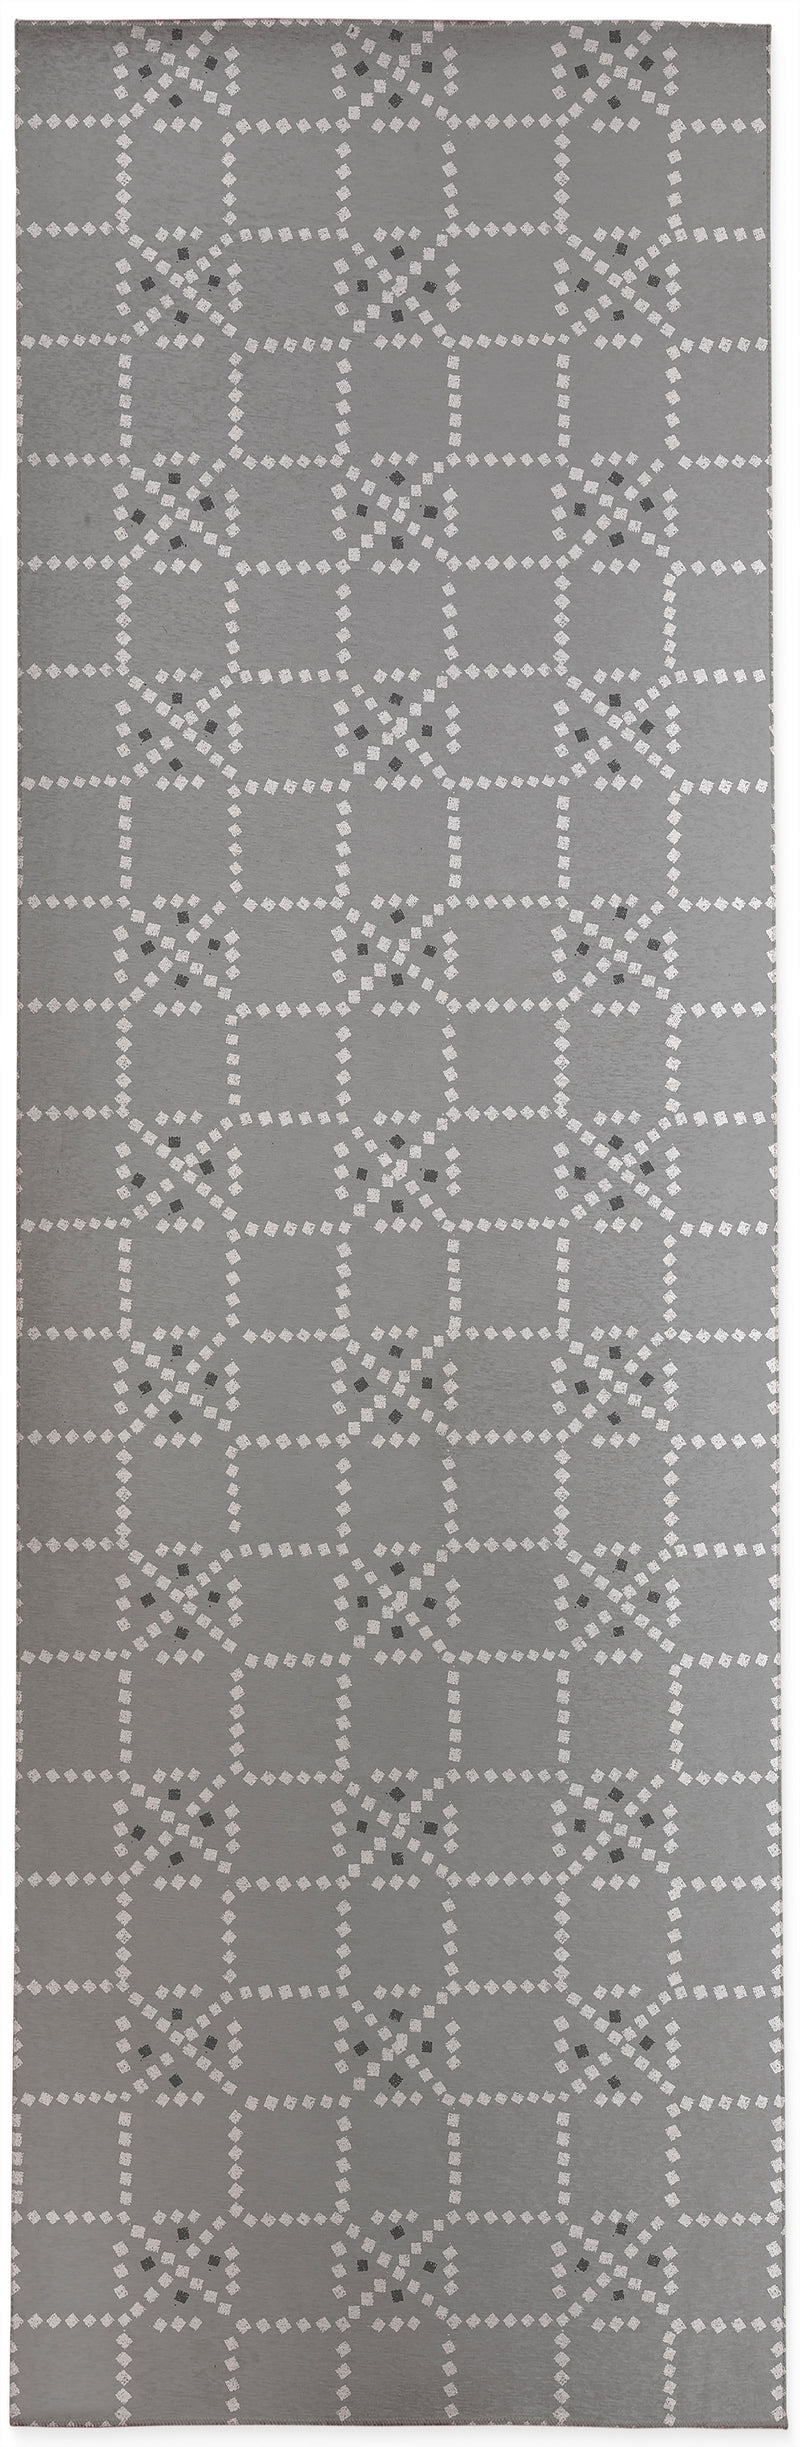 CHECKED GREY Area Rug By Kavka Designs